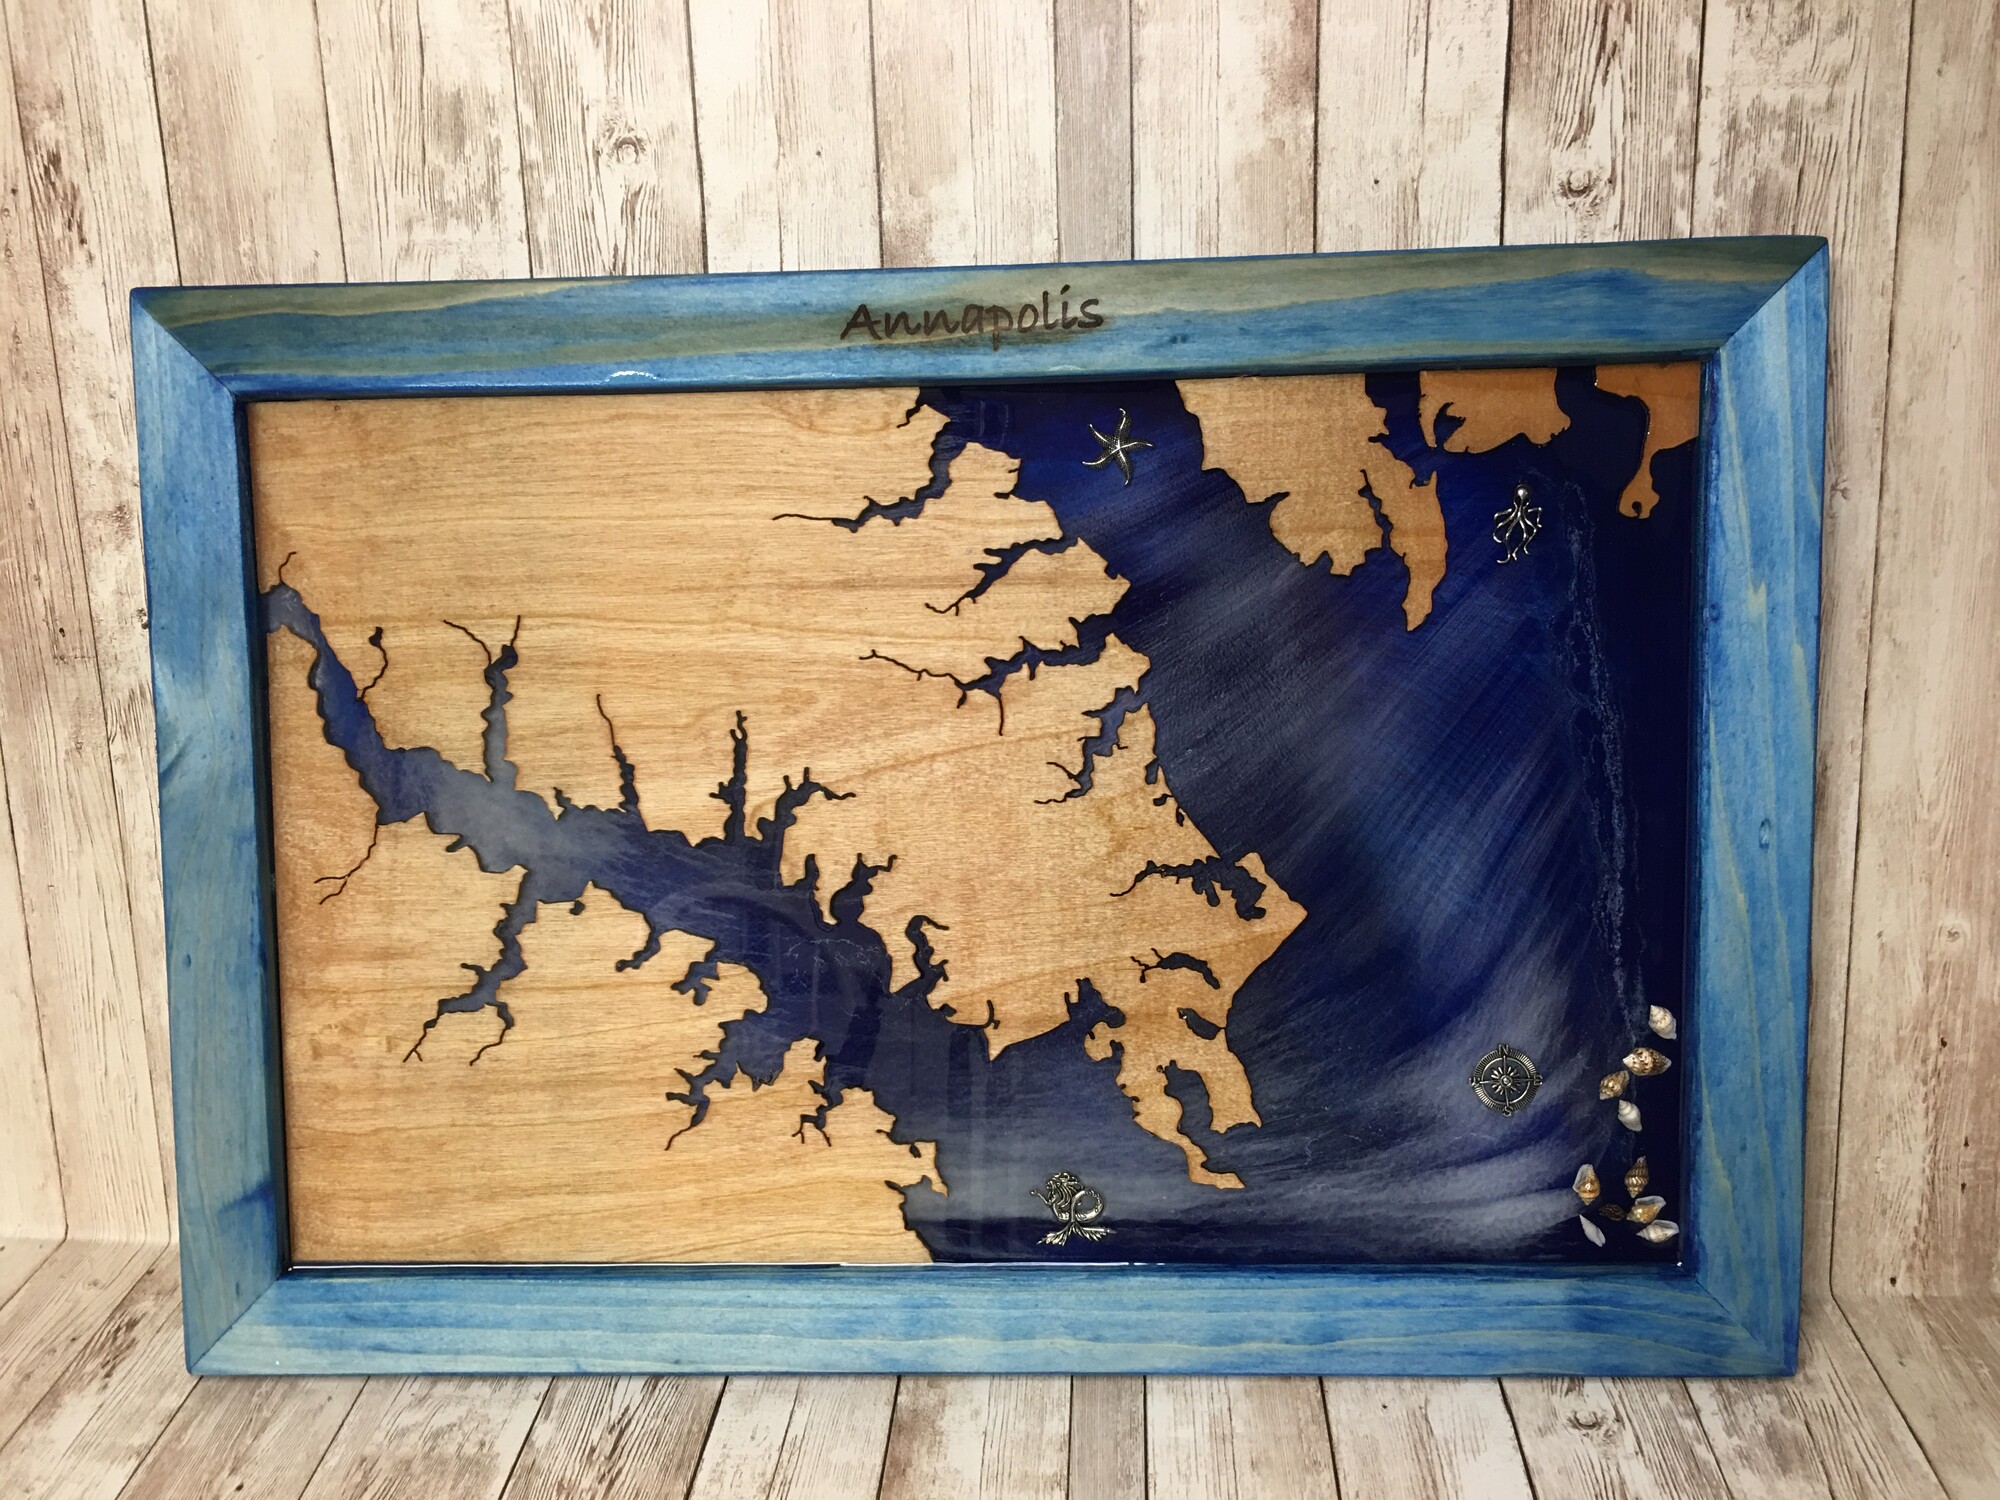 Annapolis Map
2203
Size: 14x21

This decorative map of Annapolis, Maryland was created with hand cut reclaimed wood and epoxy resin - no laser or CNC used. Each piece is unique. The frame is white pine and has marks from the wood's previous
life. The map is reclaimed maple. The epoxy resin used is non-toxic, food-safe and no-VOC.

When choosing products for your home that contain resin please know what you are buying. The epoxy resin we use is much more expensive because it is non-toxic. It is formulated using the highest quality materials and therefore produces no VOCs or fumes. It is a clean system, meaning there are no solvents or non-reactive diluents-everything in it reacts so nothing is free to become airborne and cause health issues. Our resin is so safe it can be safely used as a food contact surface.